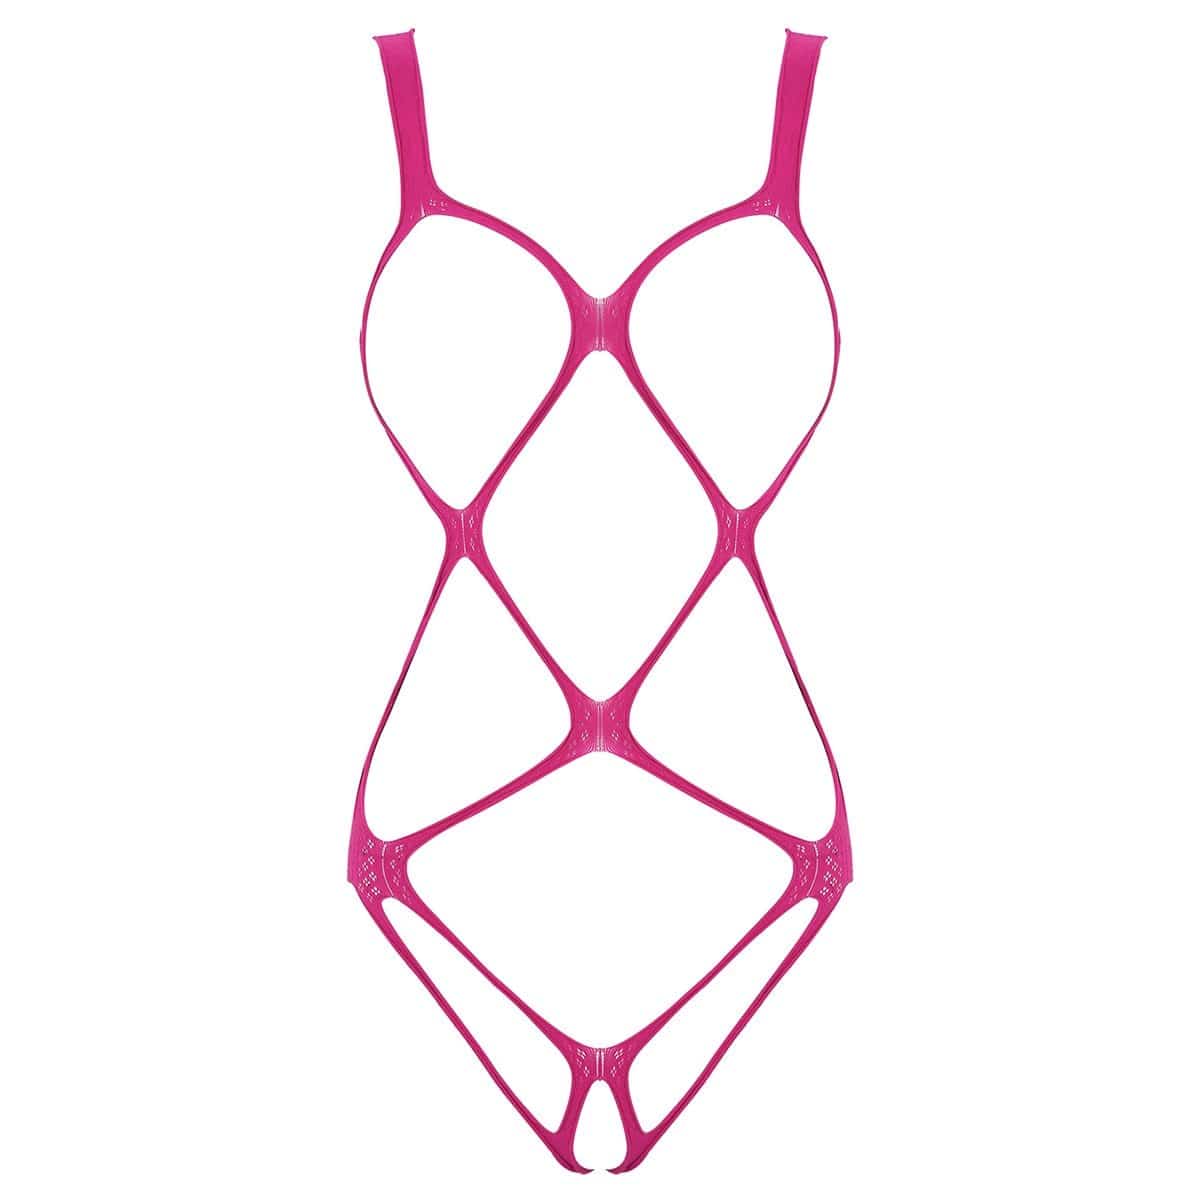 Kinky Cloth 200001800 Rose / One Size Erotic Open Crotch Harness Bodysuit